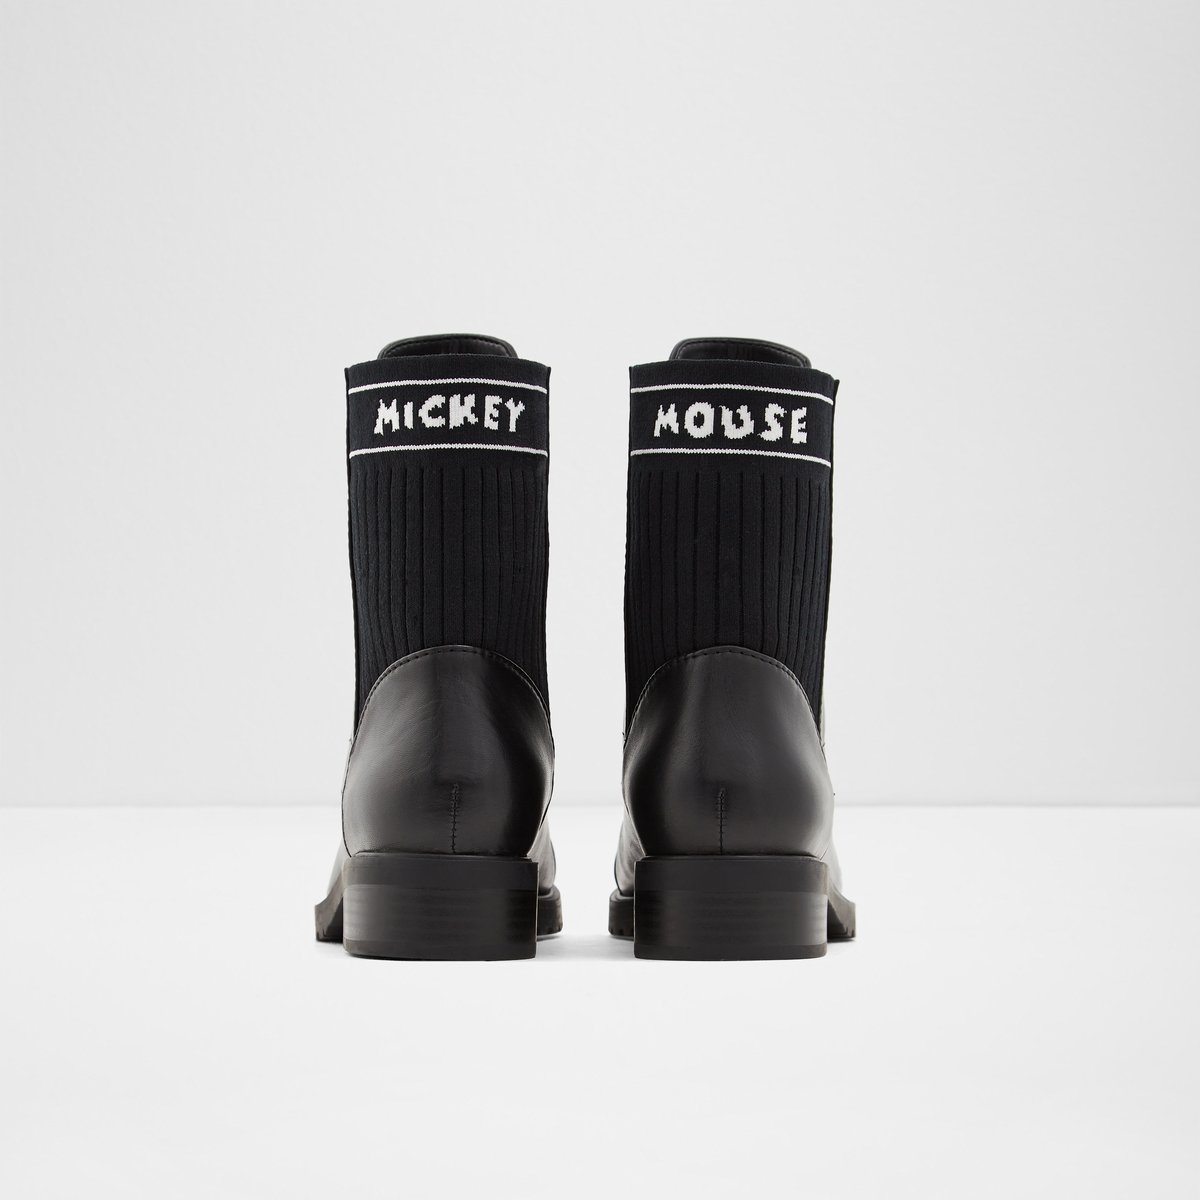 Mickey Mouse Boots Size Chart